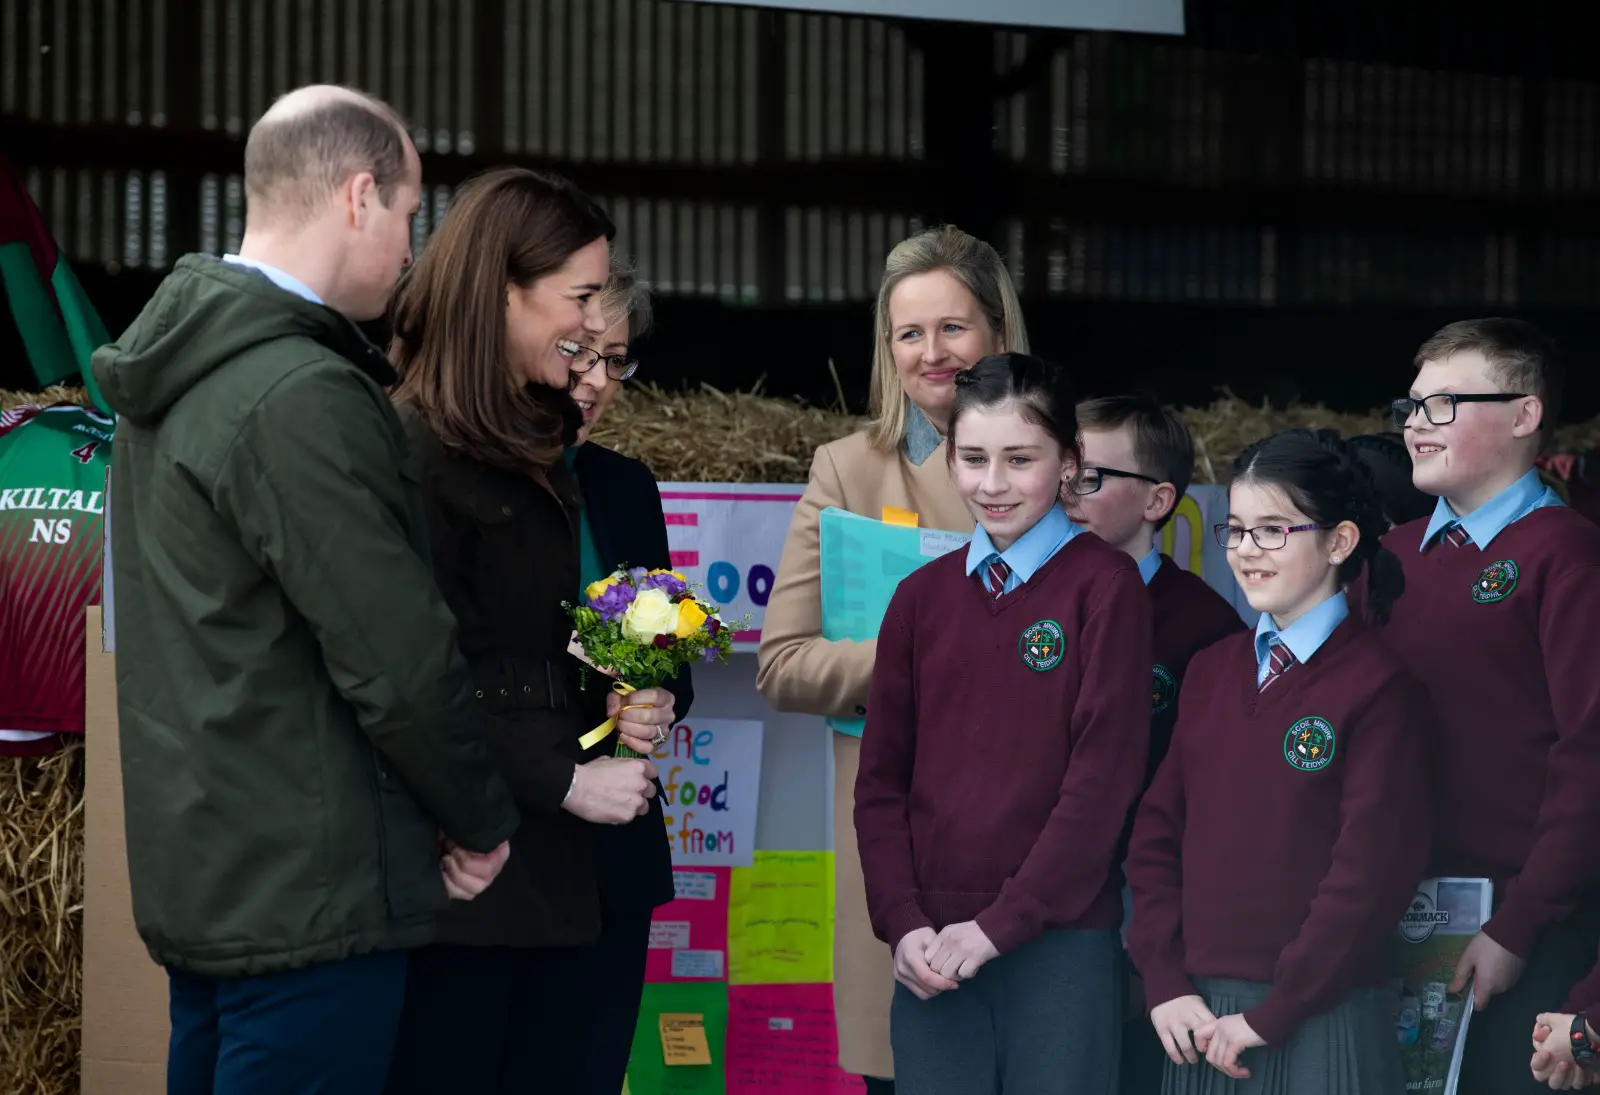 During the farm visit, the royal couple was joined by a group of school children who welcomed the Duchess with a posy.